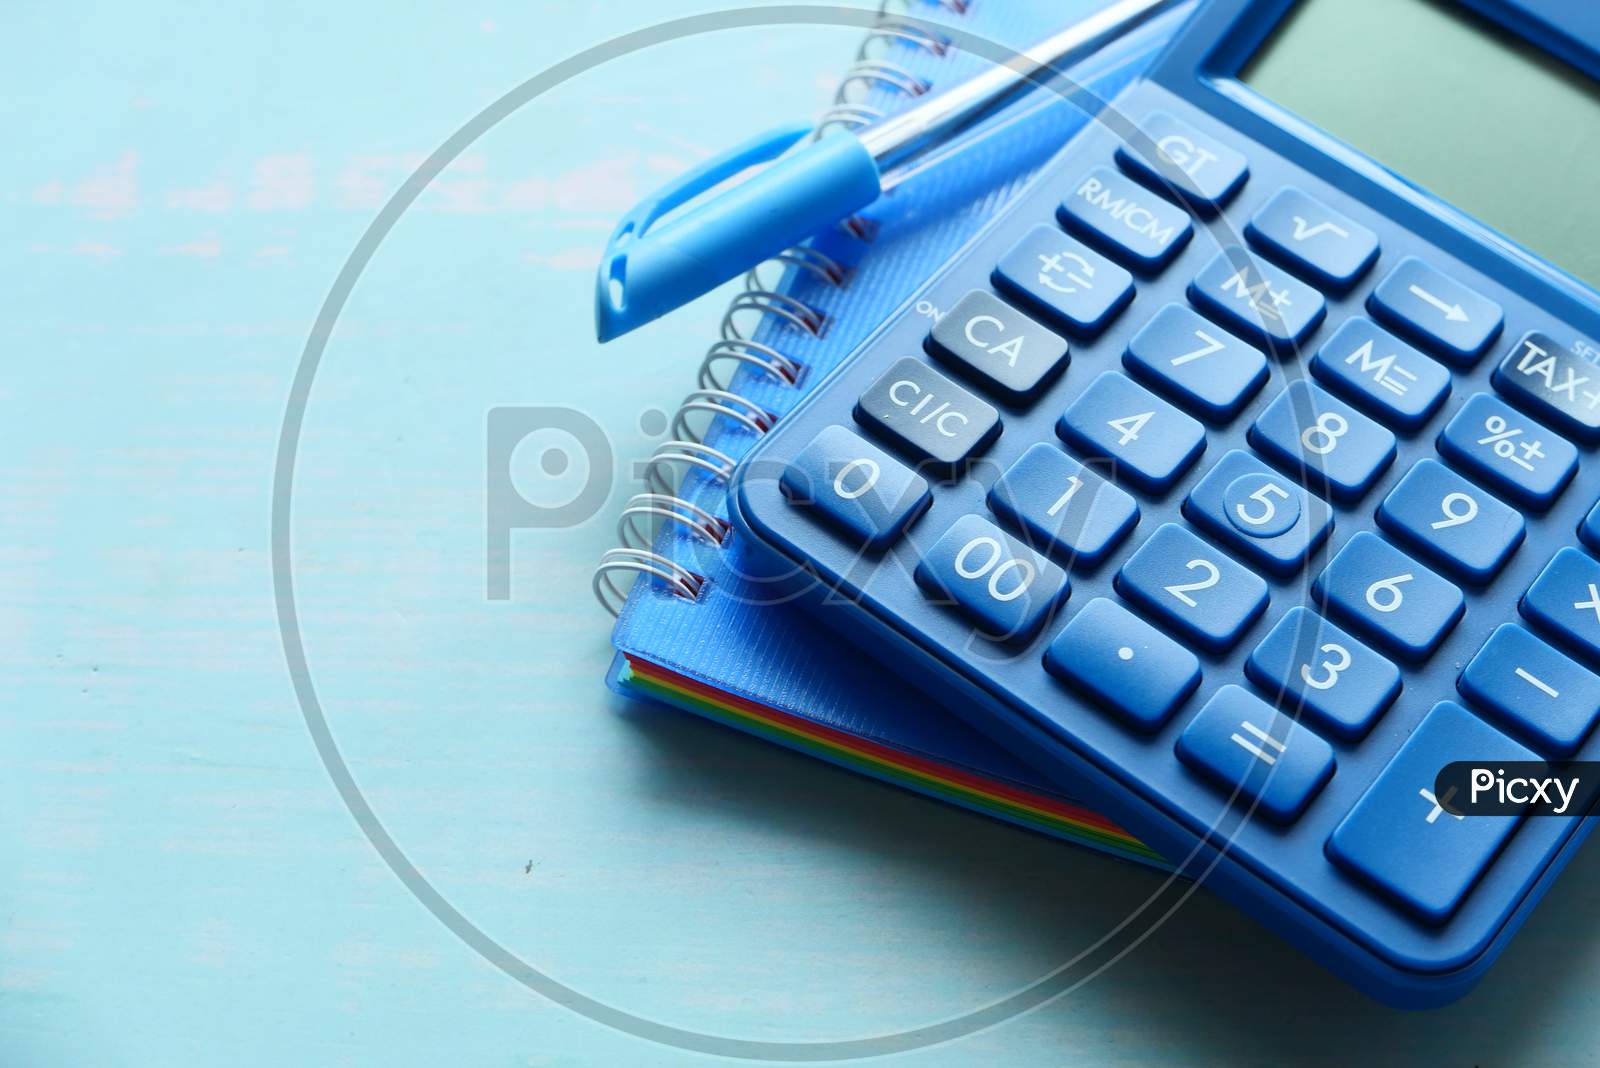 Close Up Of Calculator, Pen And Notepad On Desk